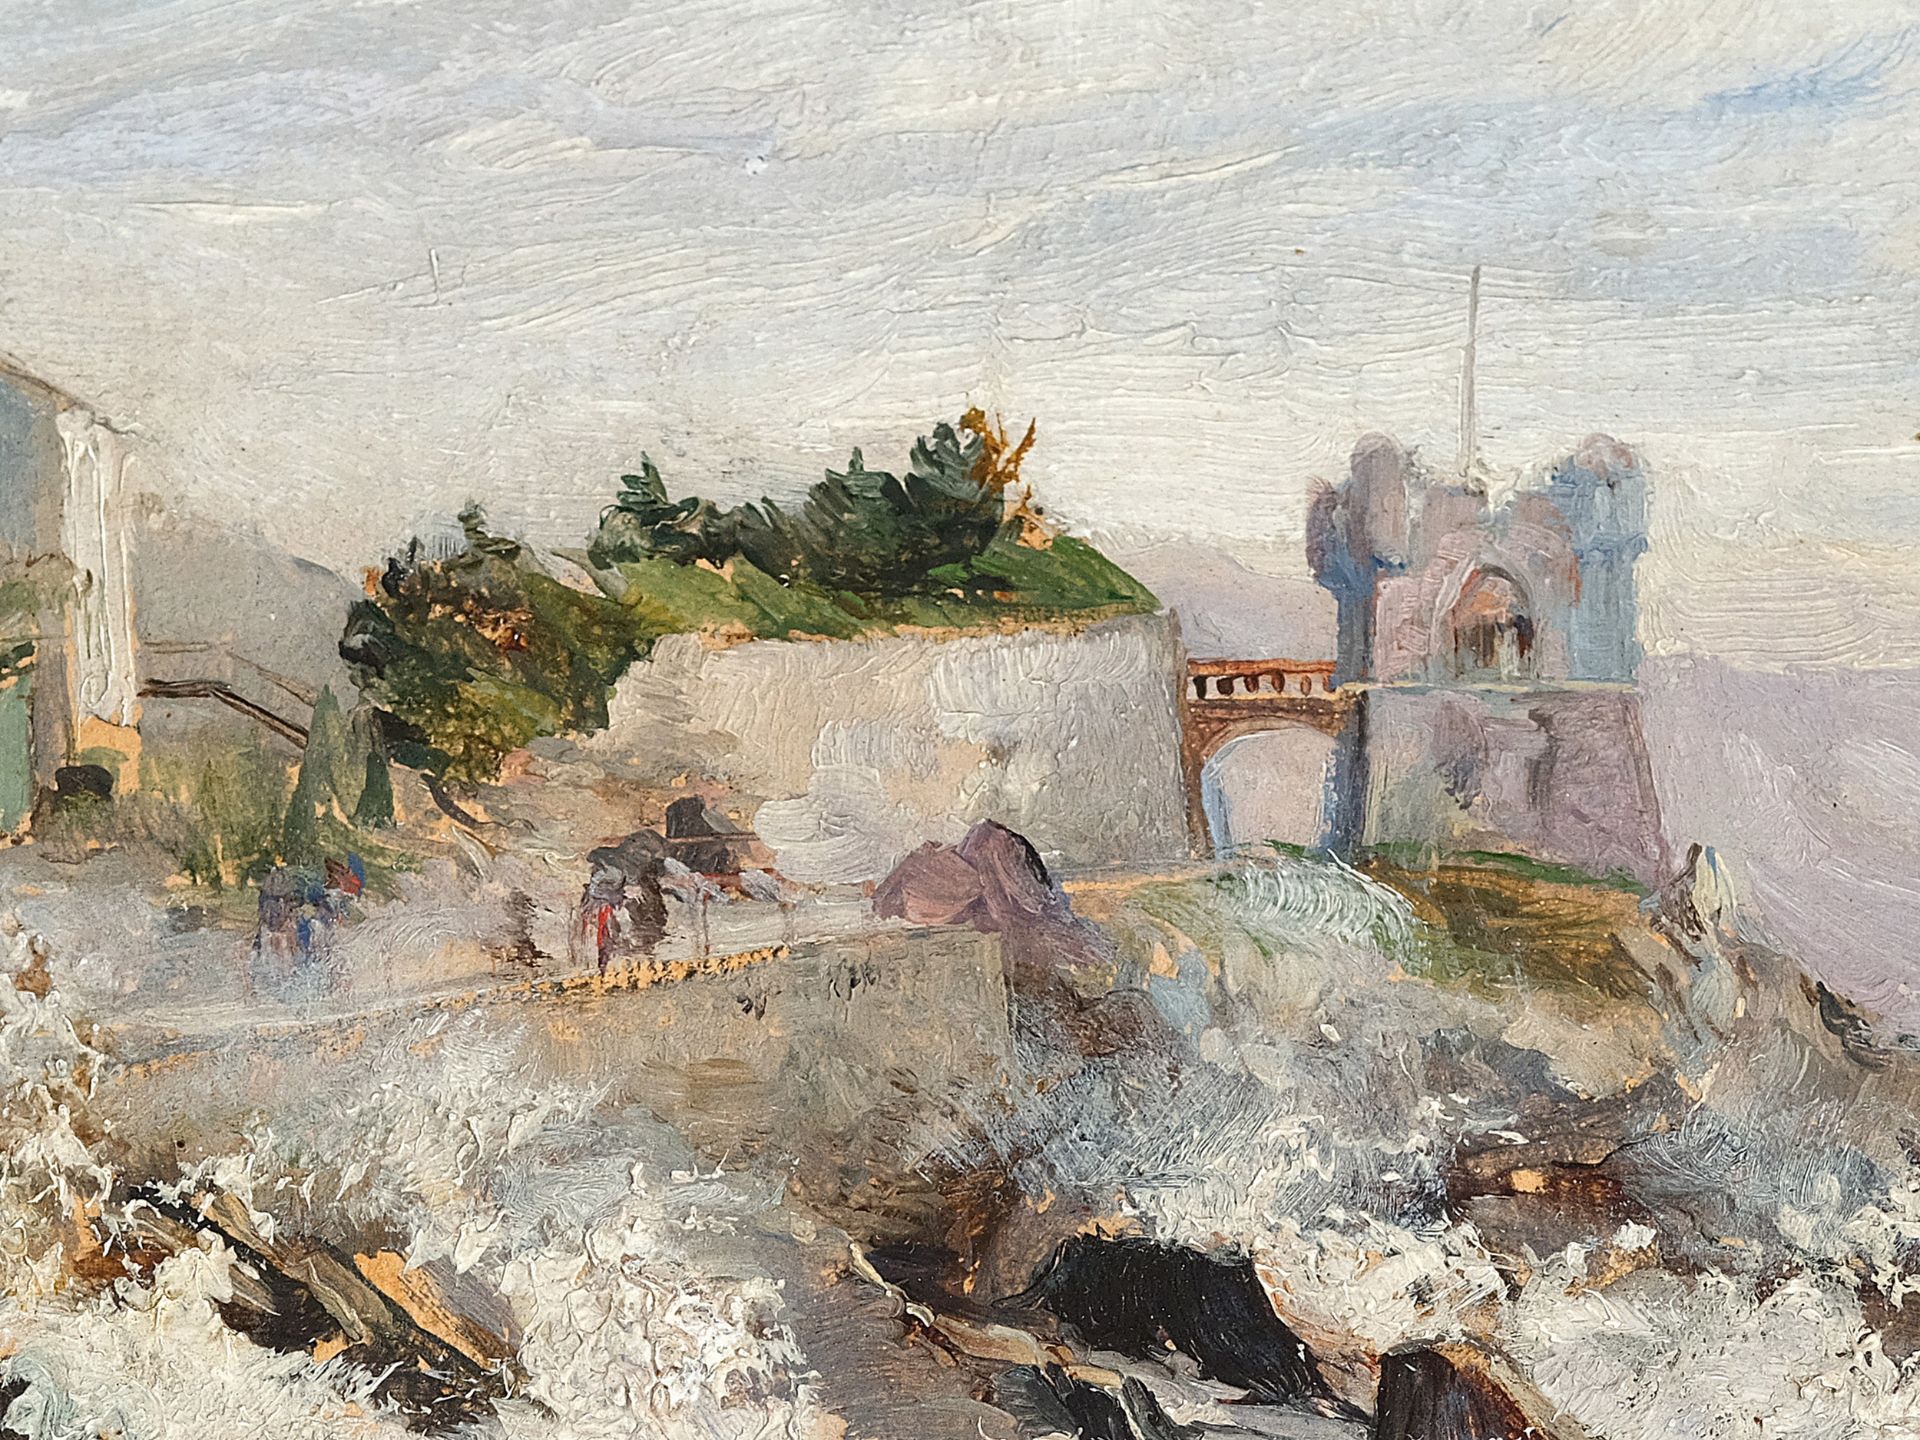 Unknown painter, Sea surf - Image 3 of 5